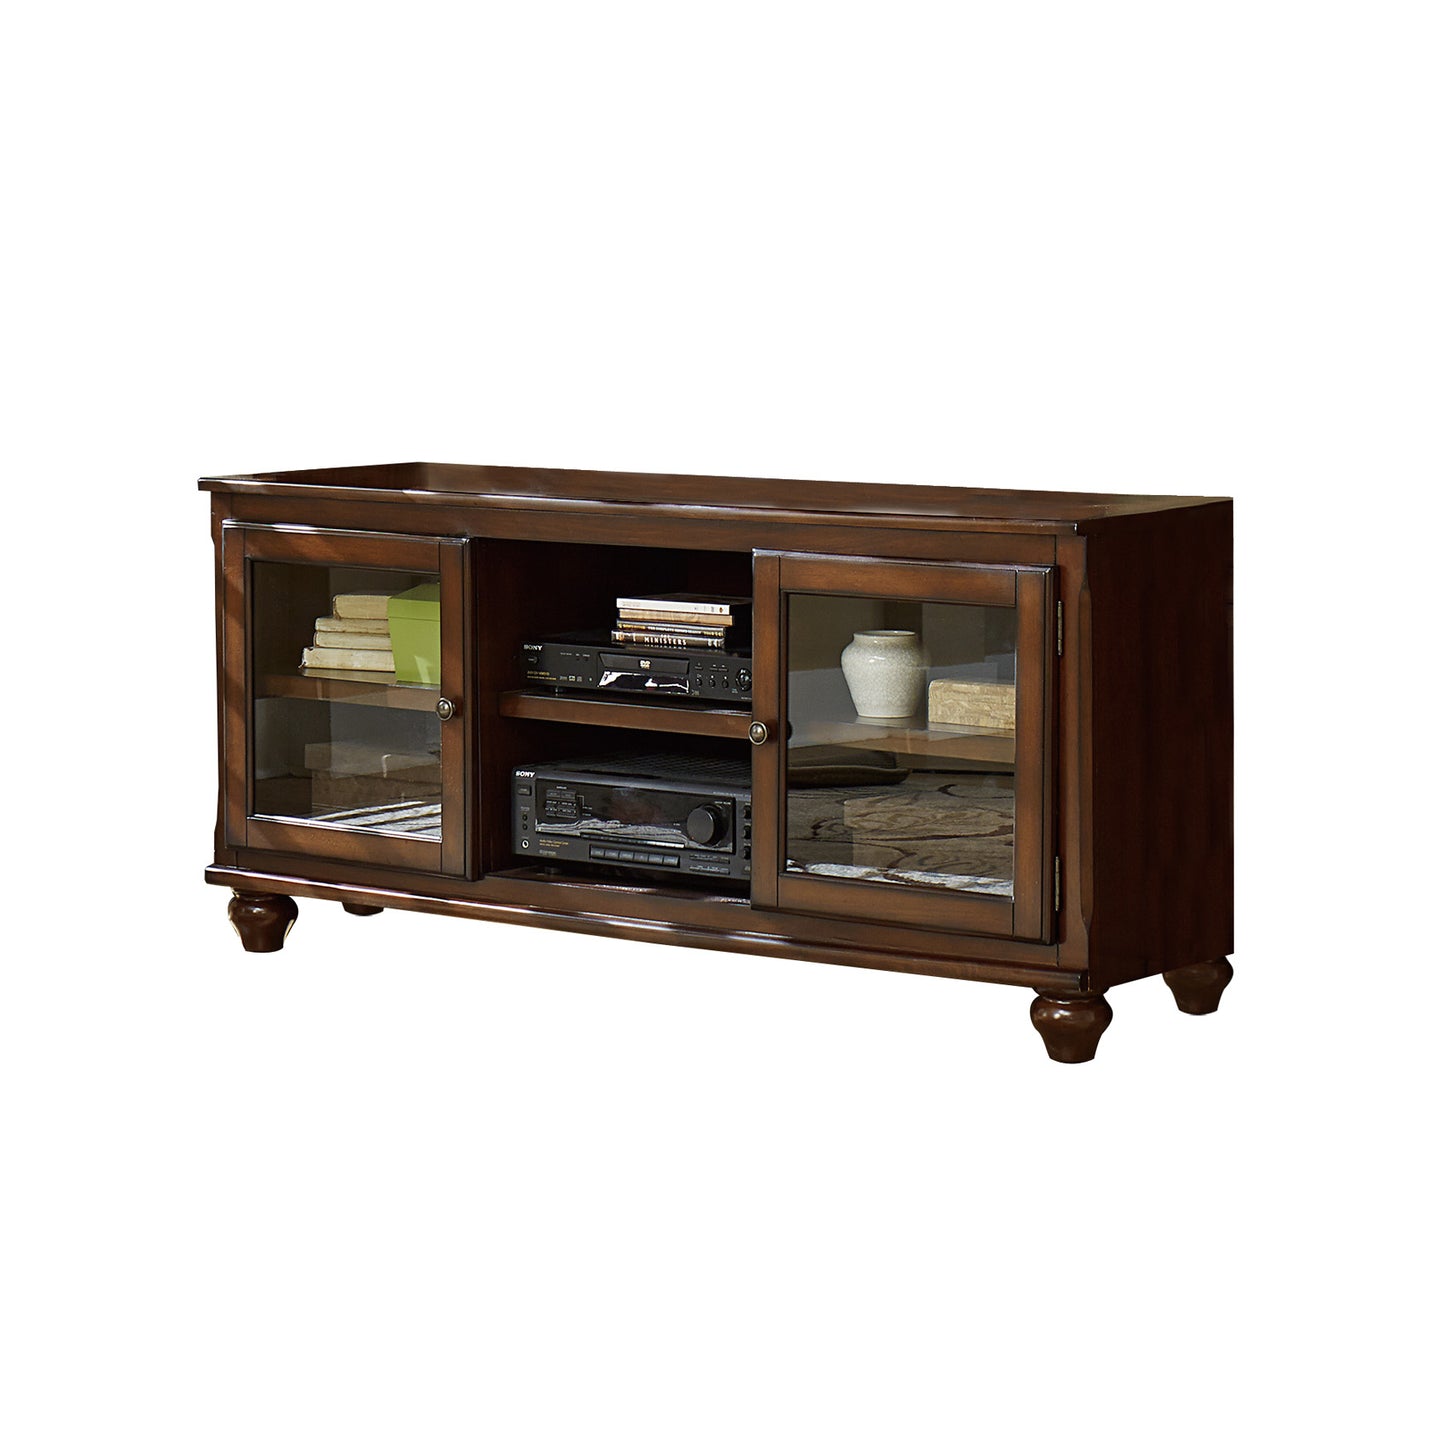 Lenore 58" TV Stand CHERRY ONLY